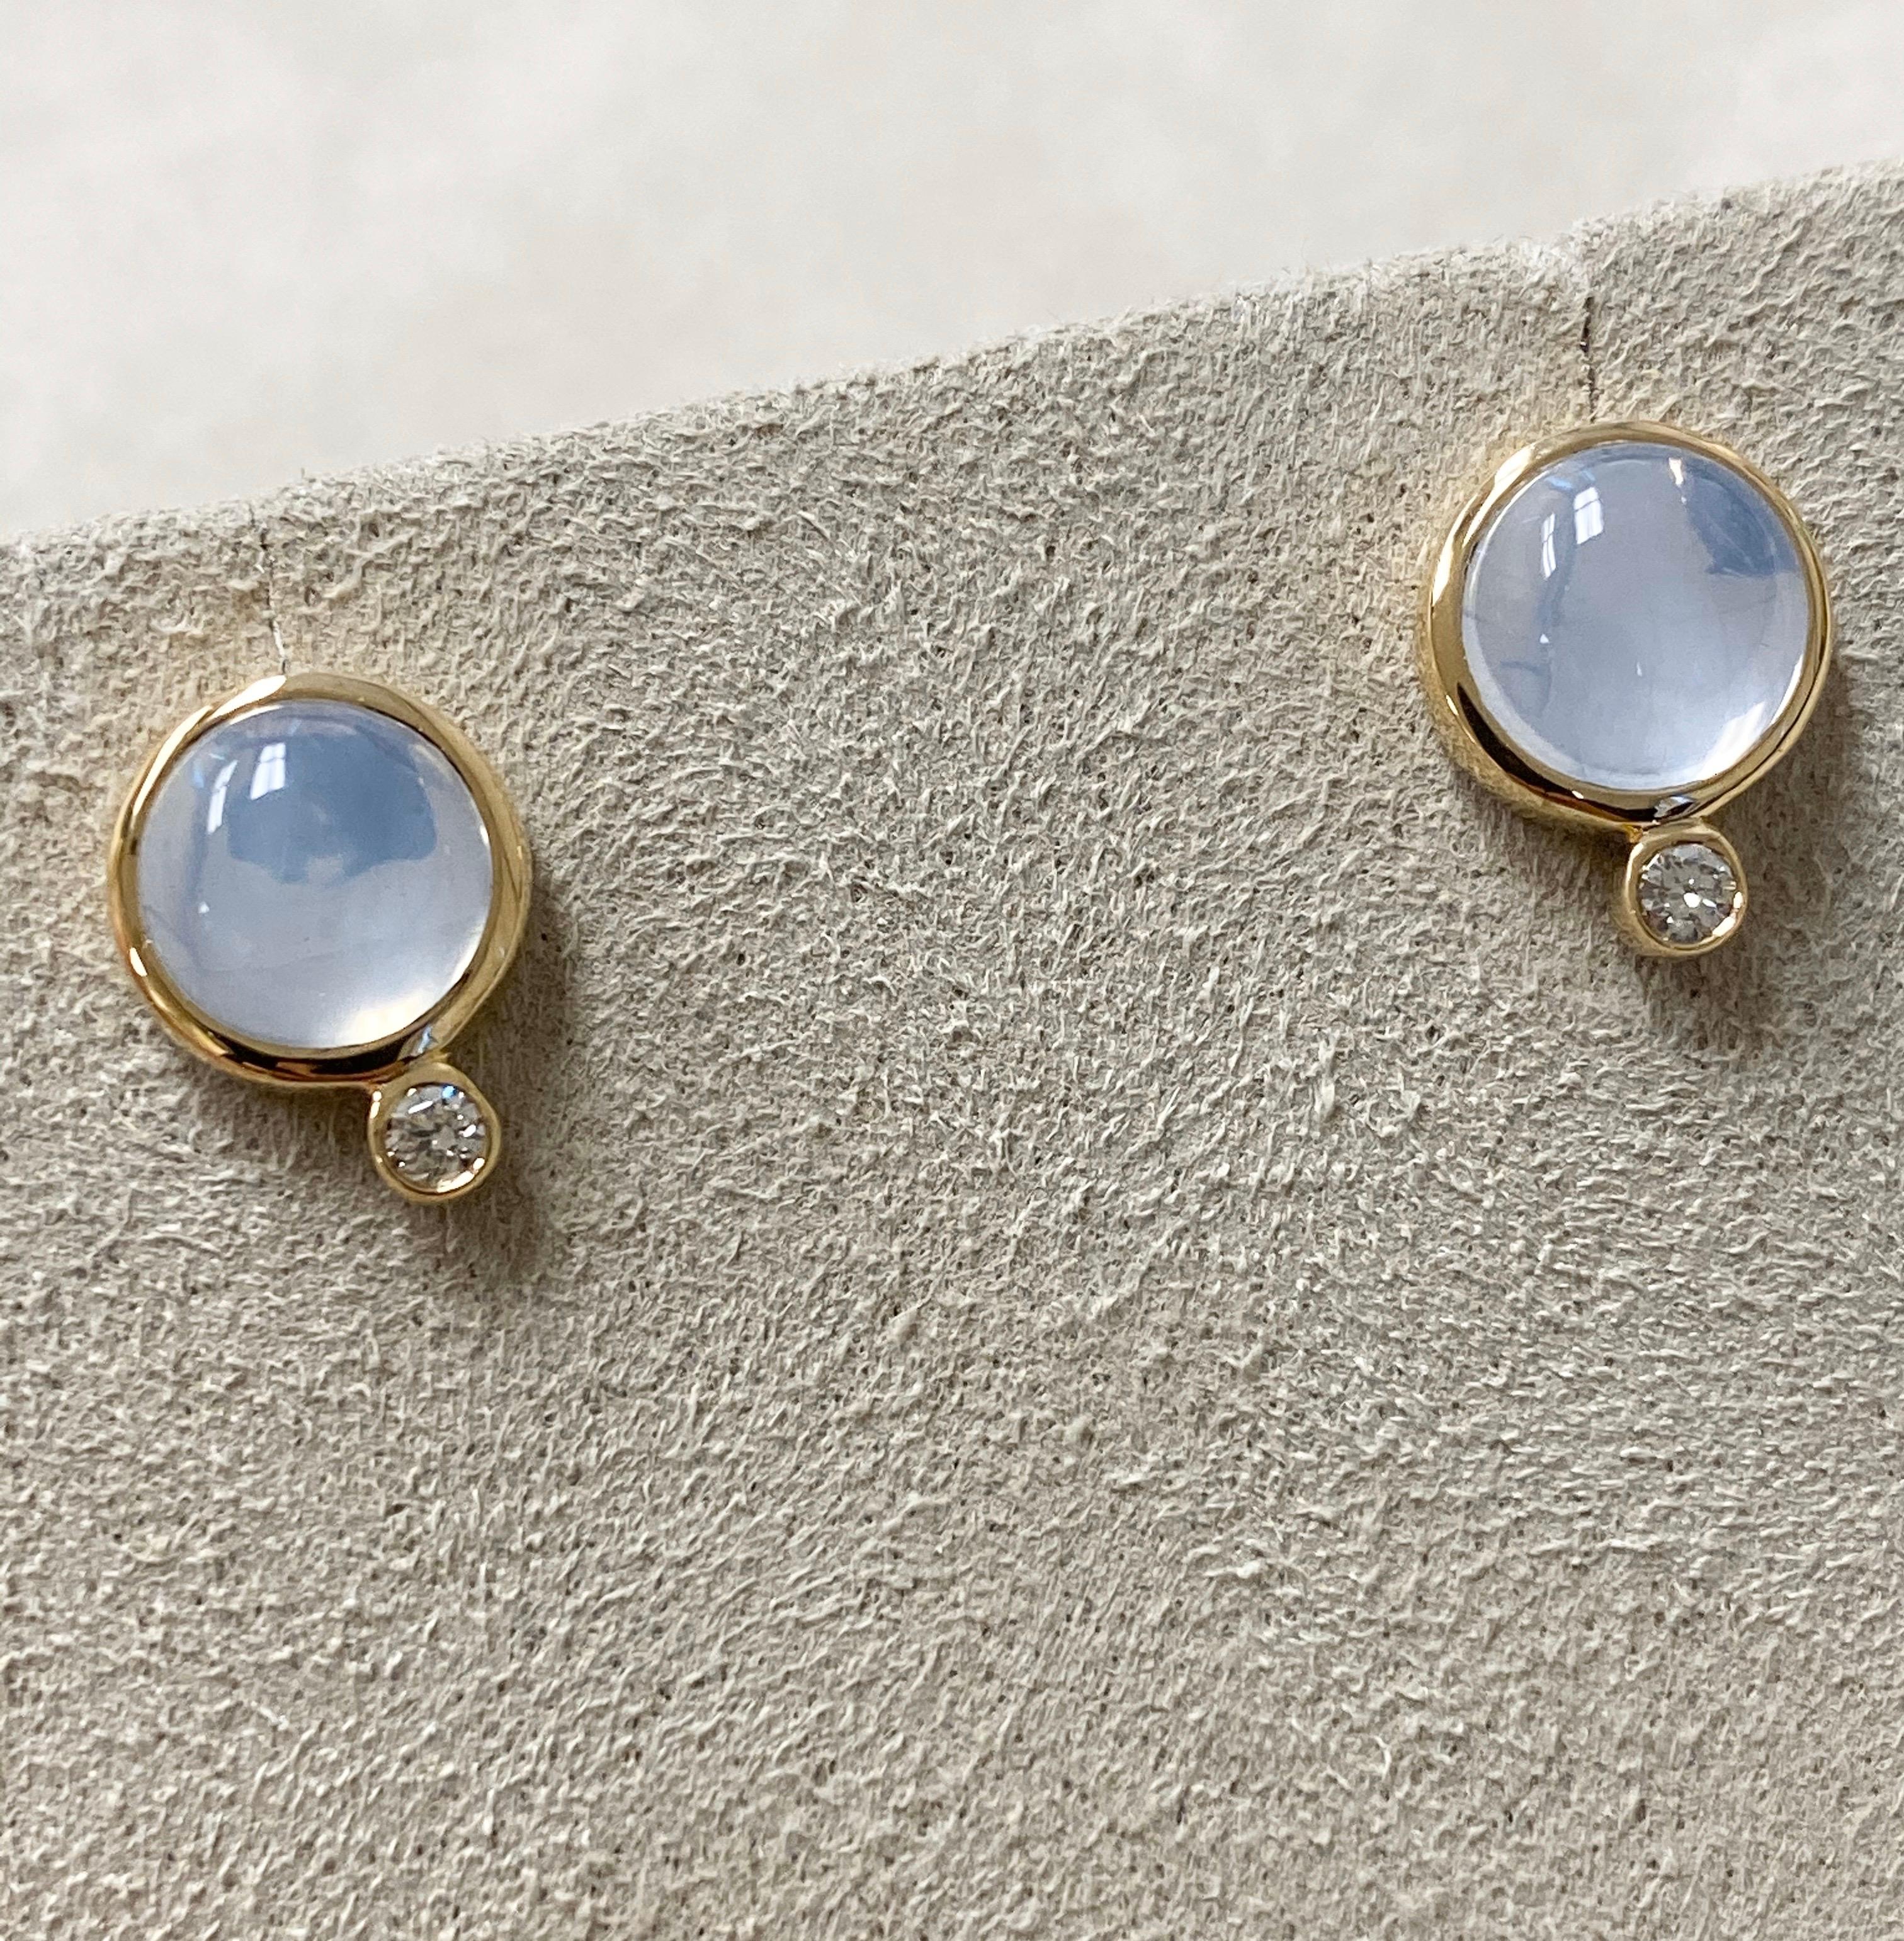 Created in 18 karat yellow gold
Moon quartz 4 cts approx
Diamonds 0.10 ct approx
Can be worn at different angles
Limited edition

These exquisite Candy Blue Topaz & Diamond Earrings are a rare sight. The limited edition design is delicately crafted